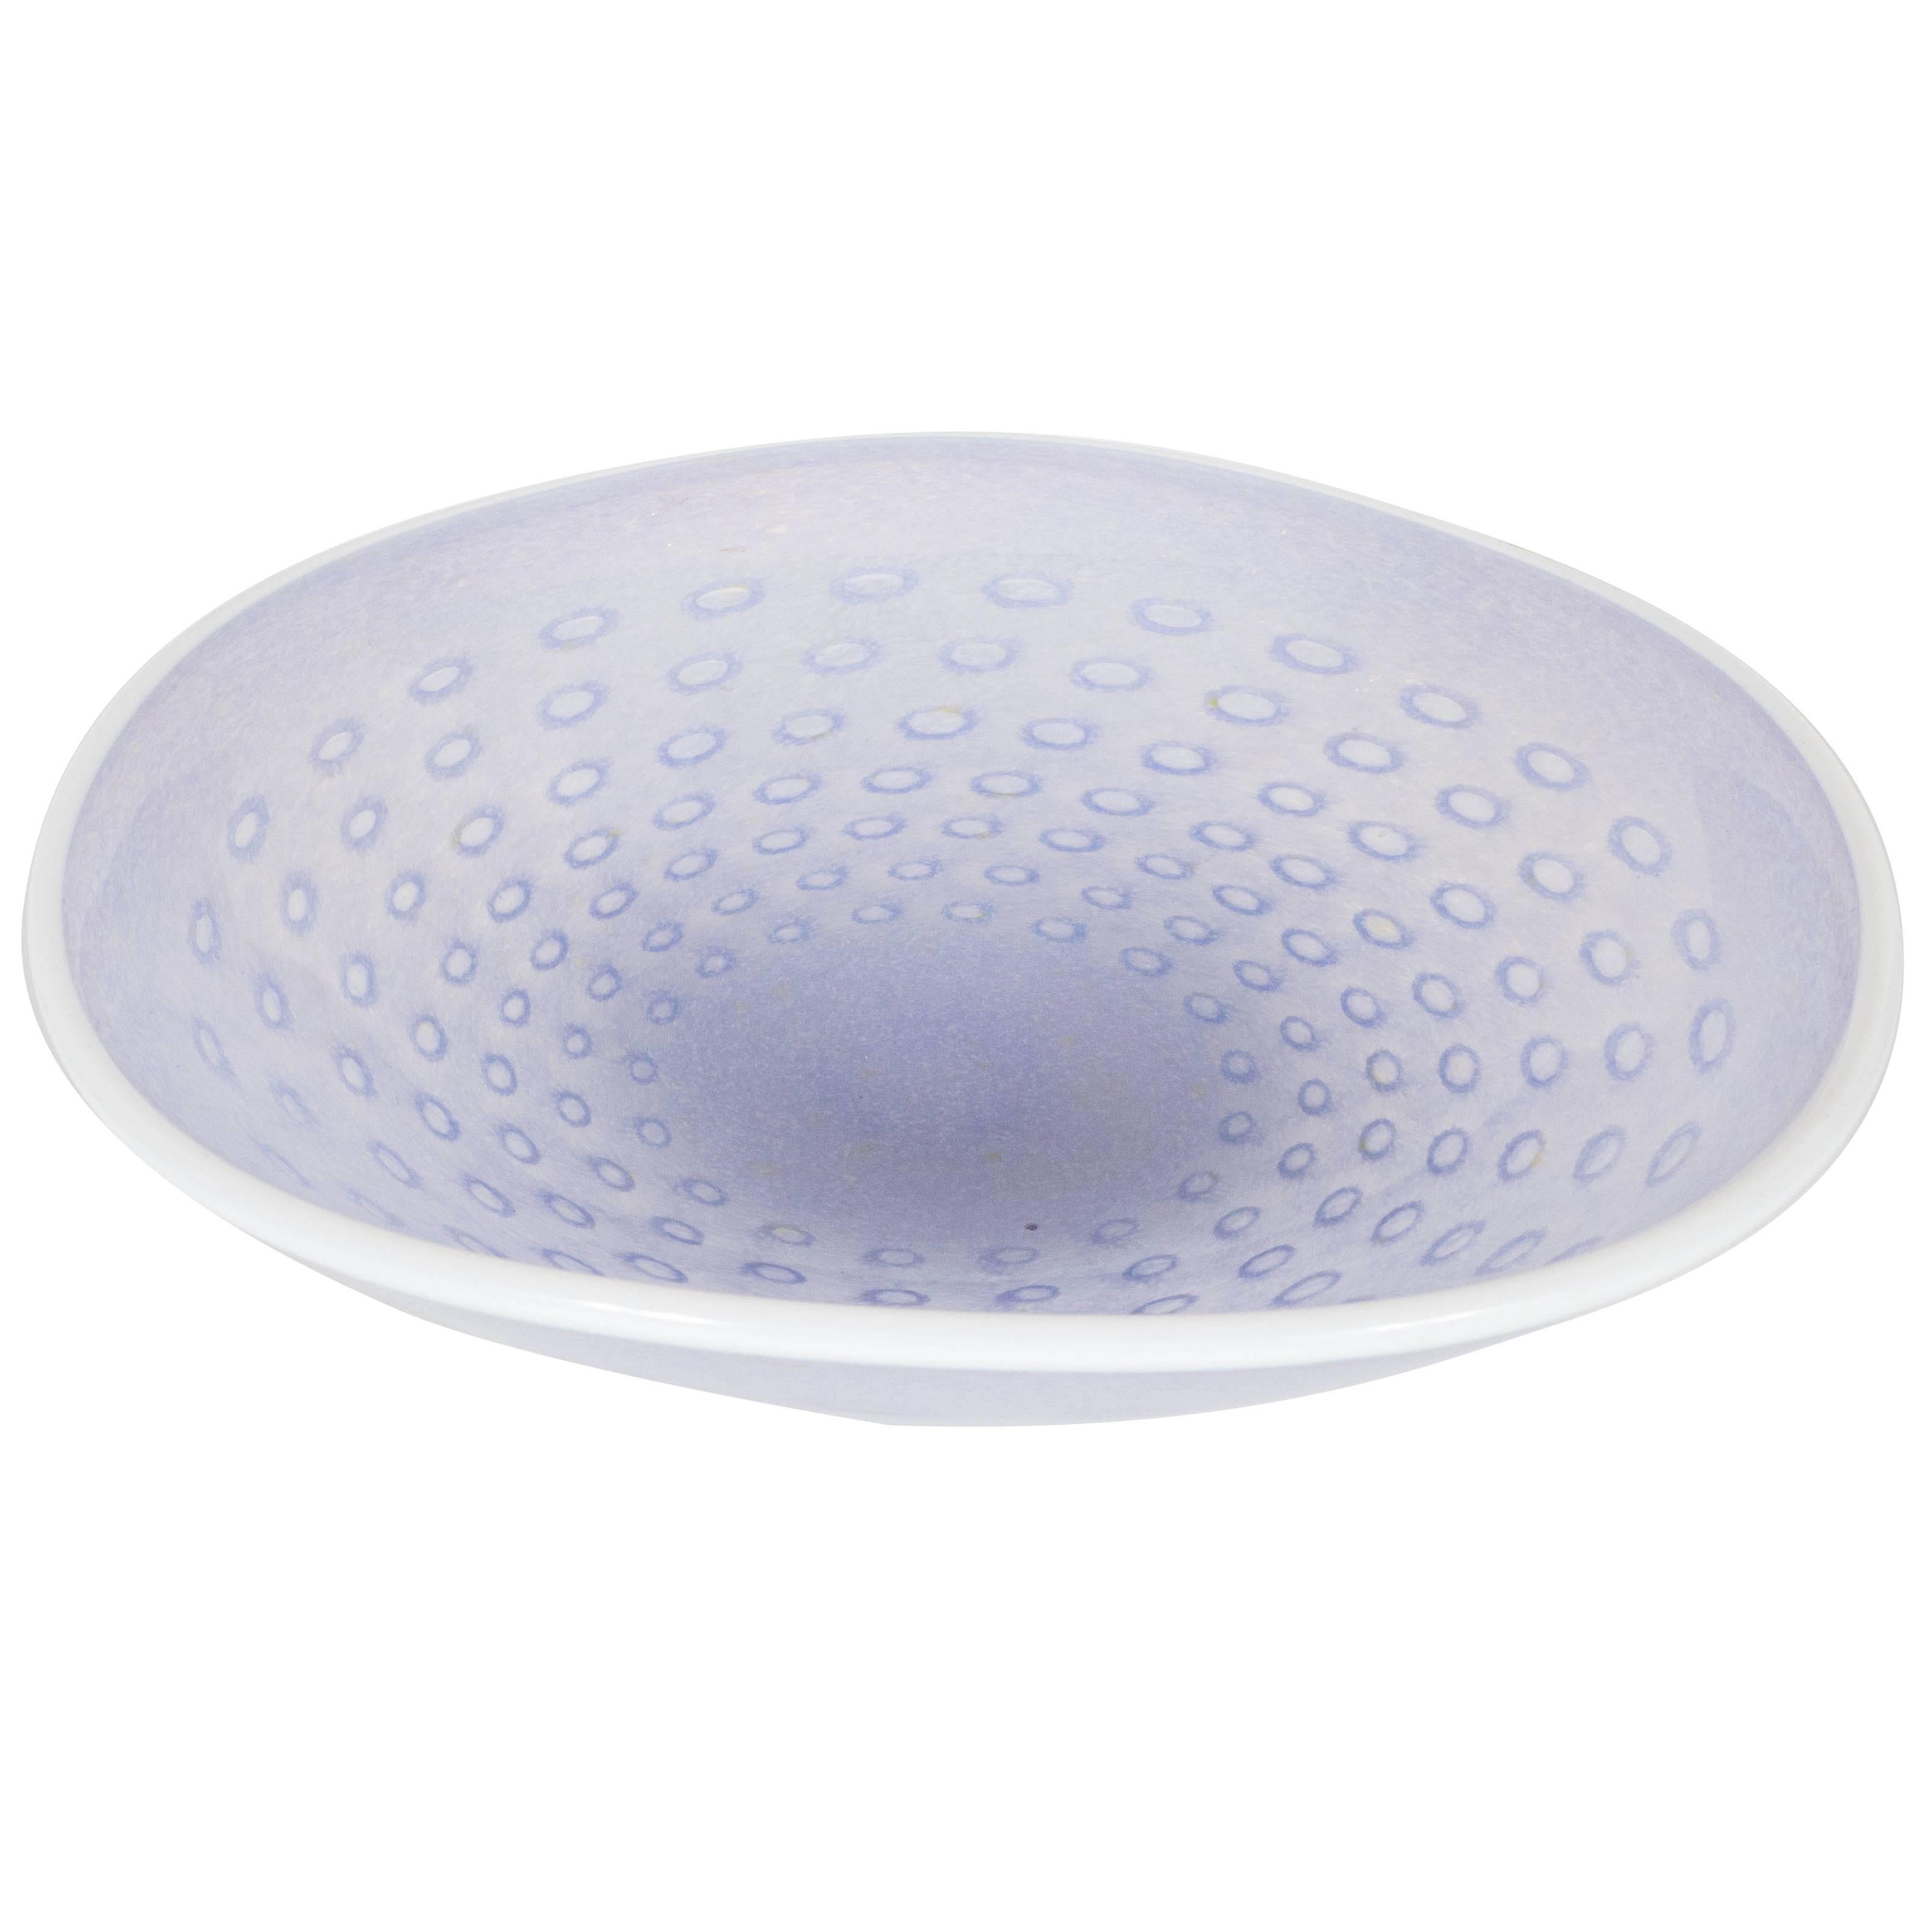 Translucent Handblown Murano Glass Bowl in Whites and Pale Lavender